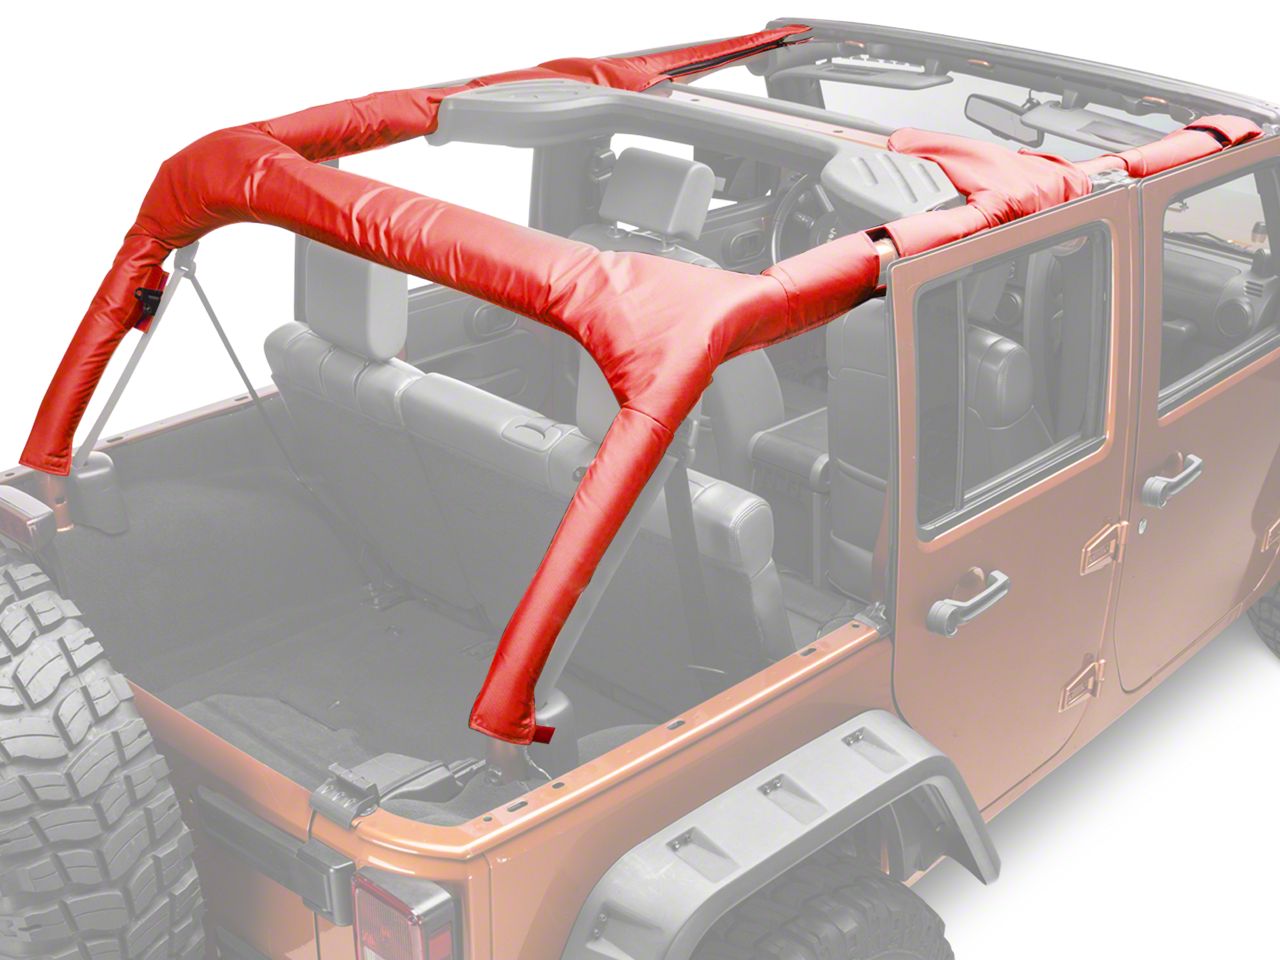 Jeep Roll Bars & Cages 2007-2018 JK